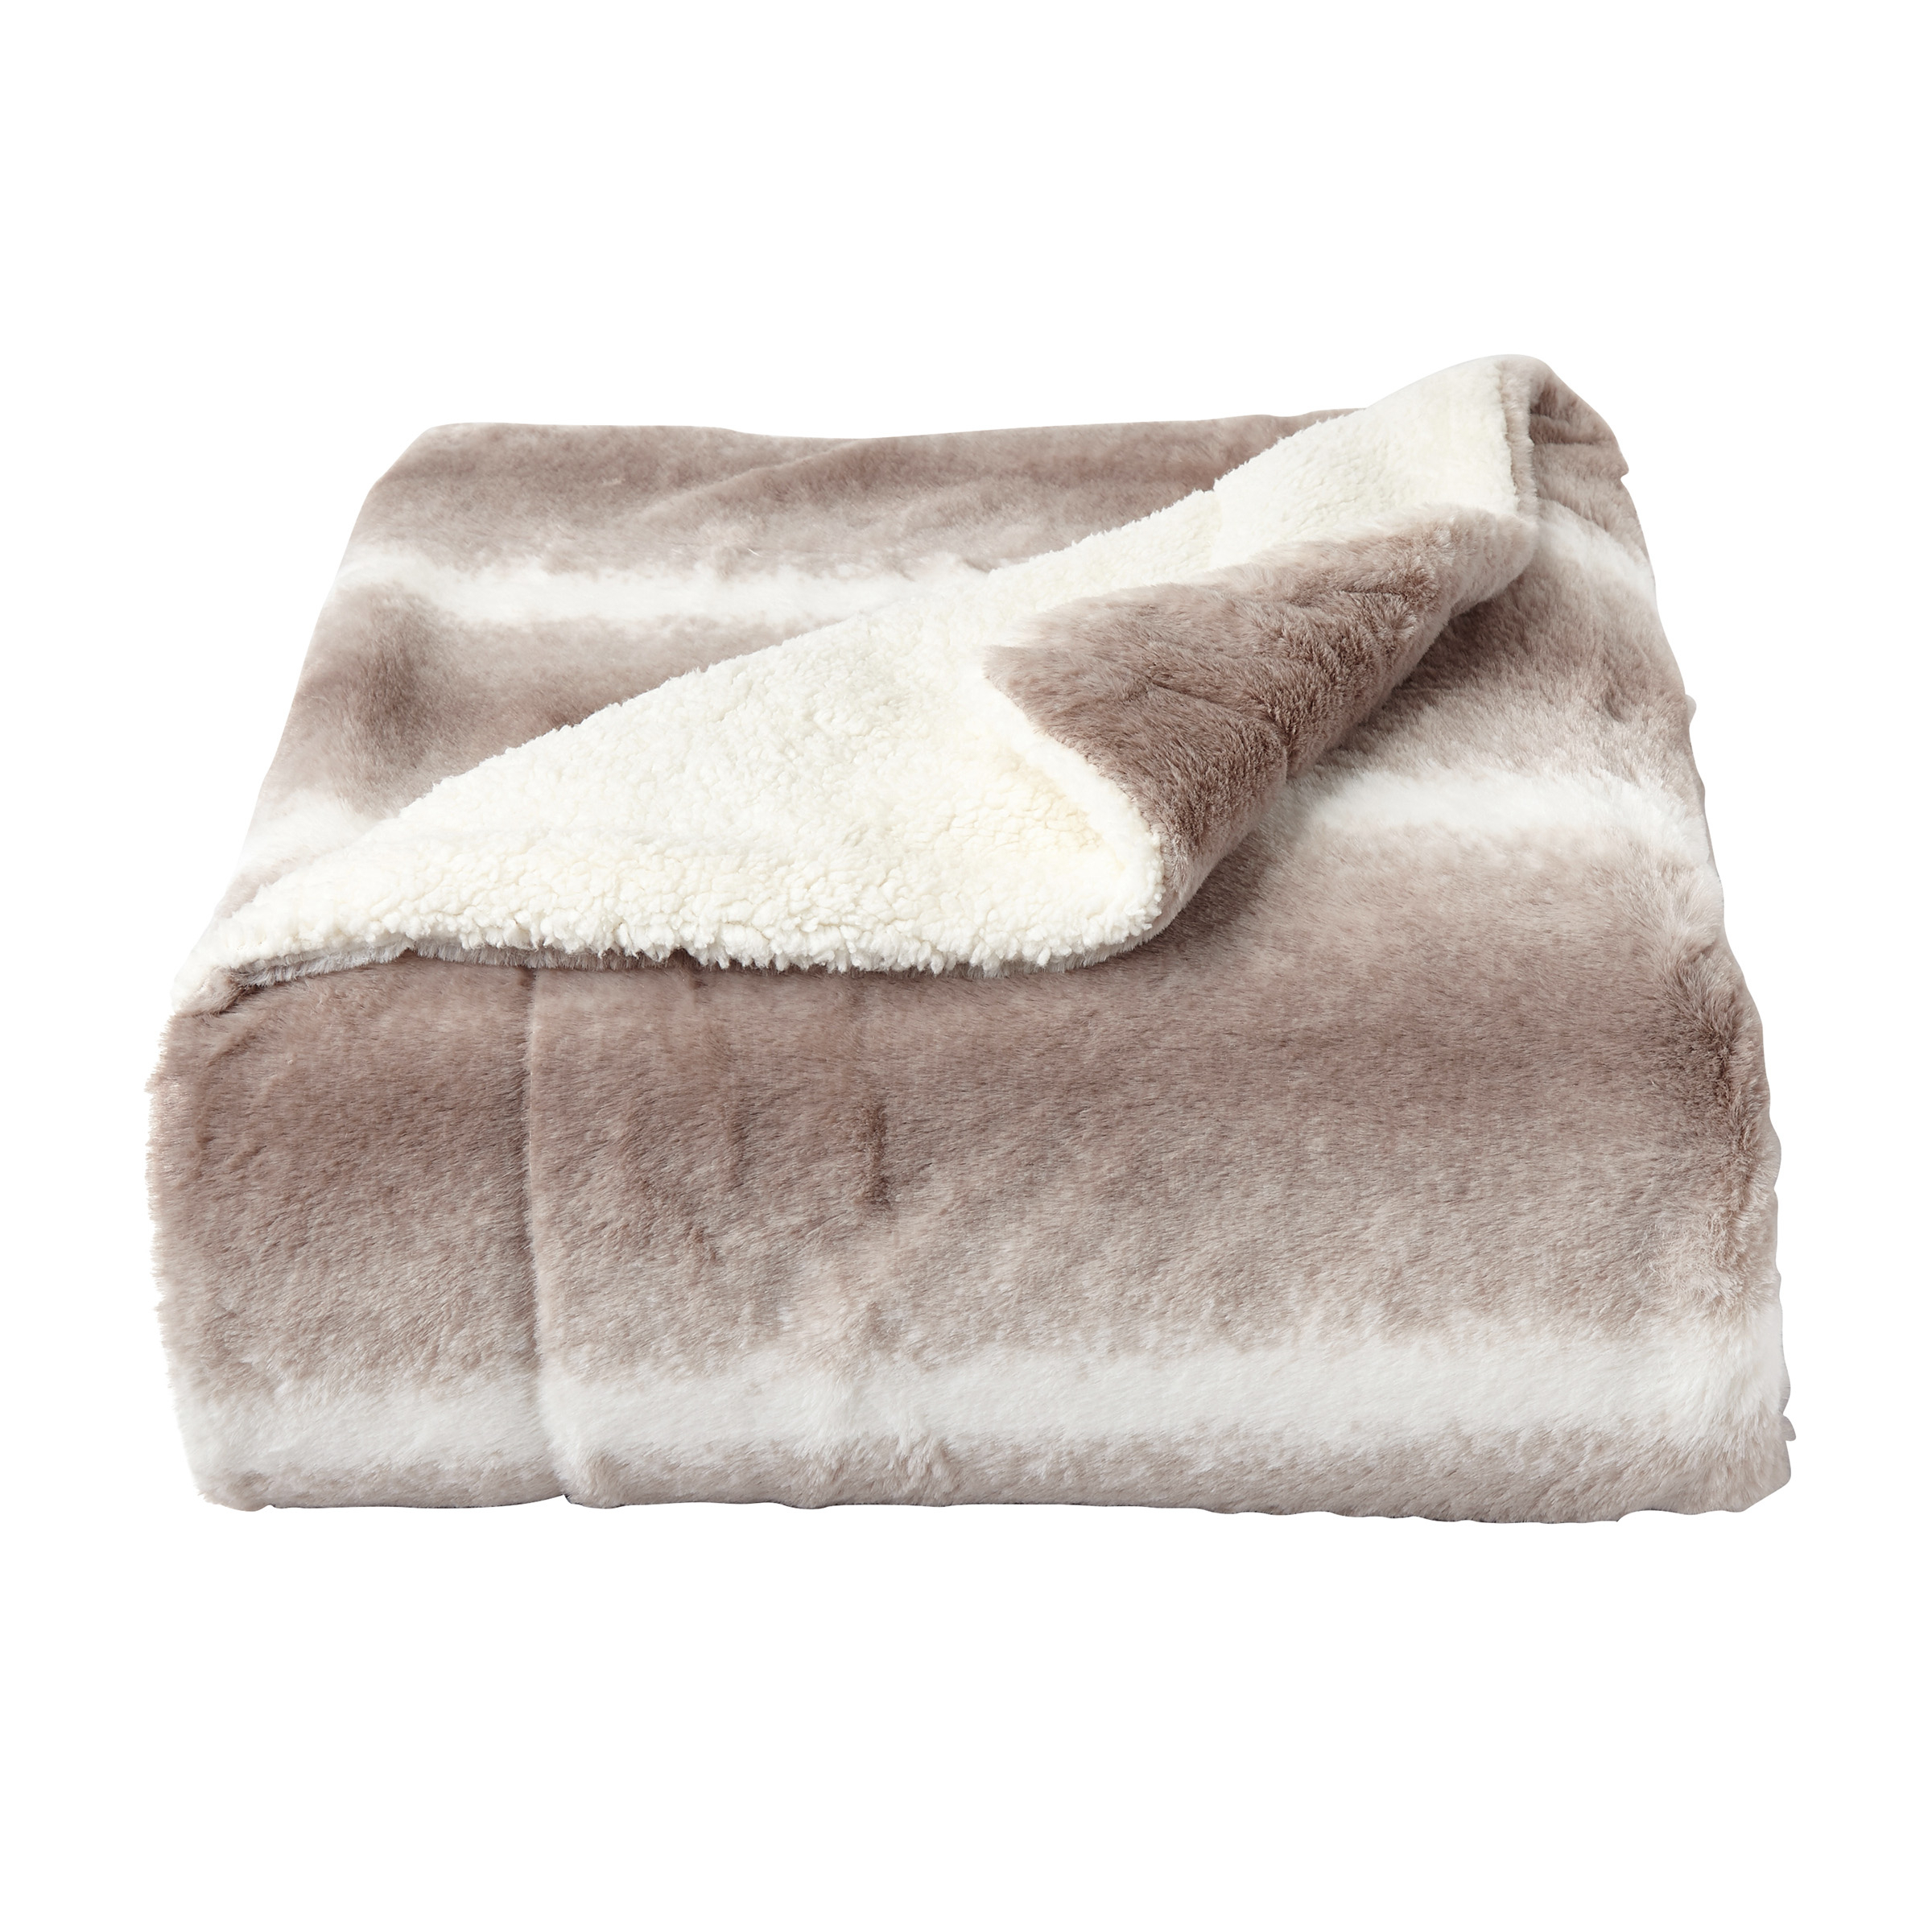 XL Faux Rabbit Fur Fuzzy Softness Throw Blanket 60 X 70 Inches Couch Chair Warm Cover Great Gift